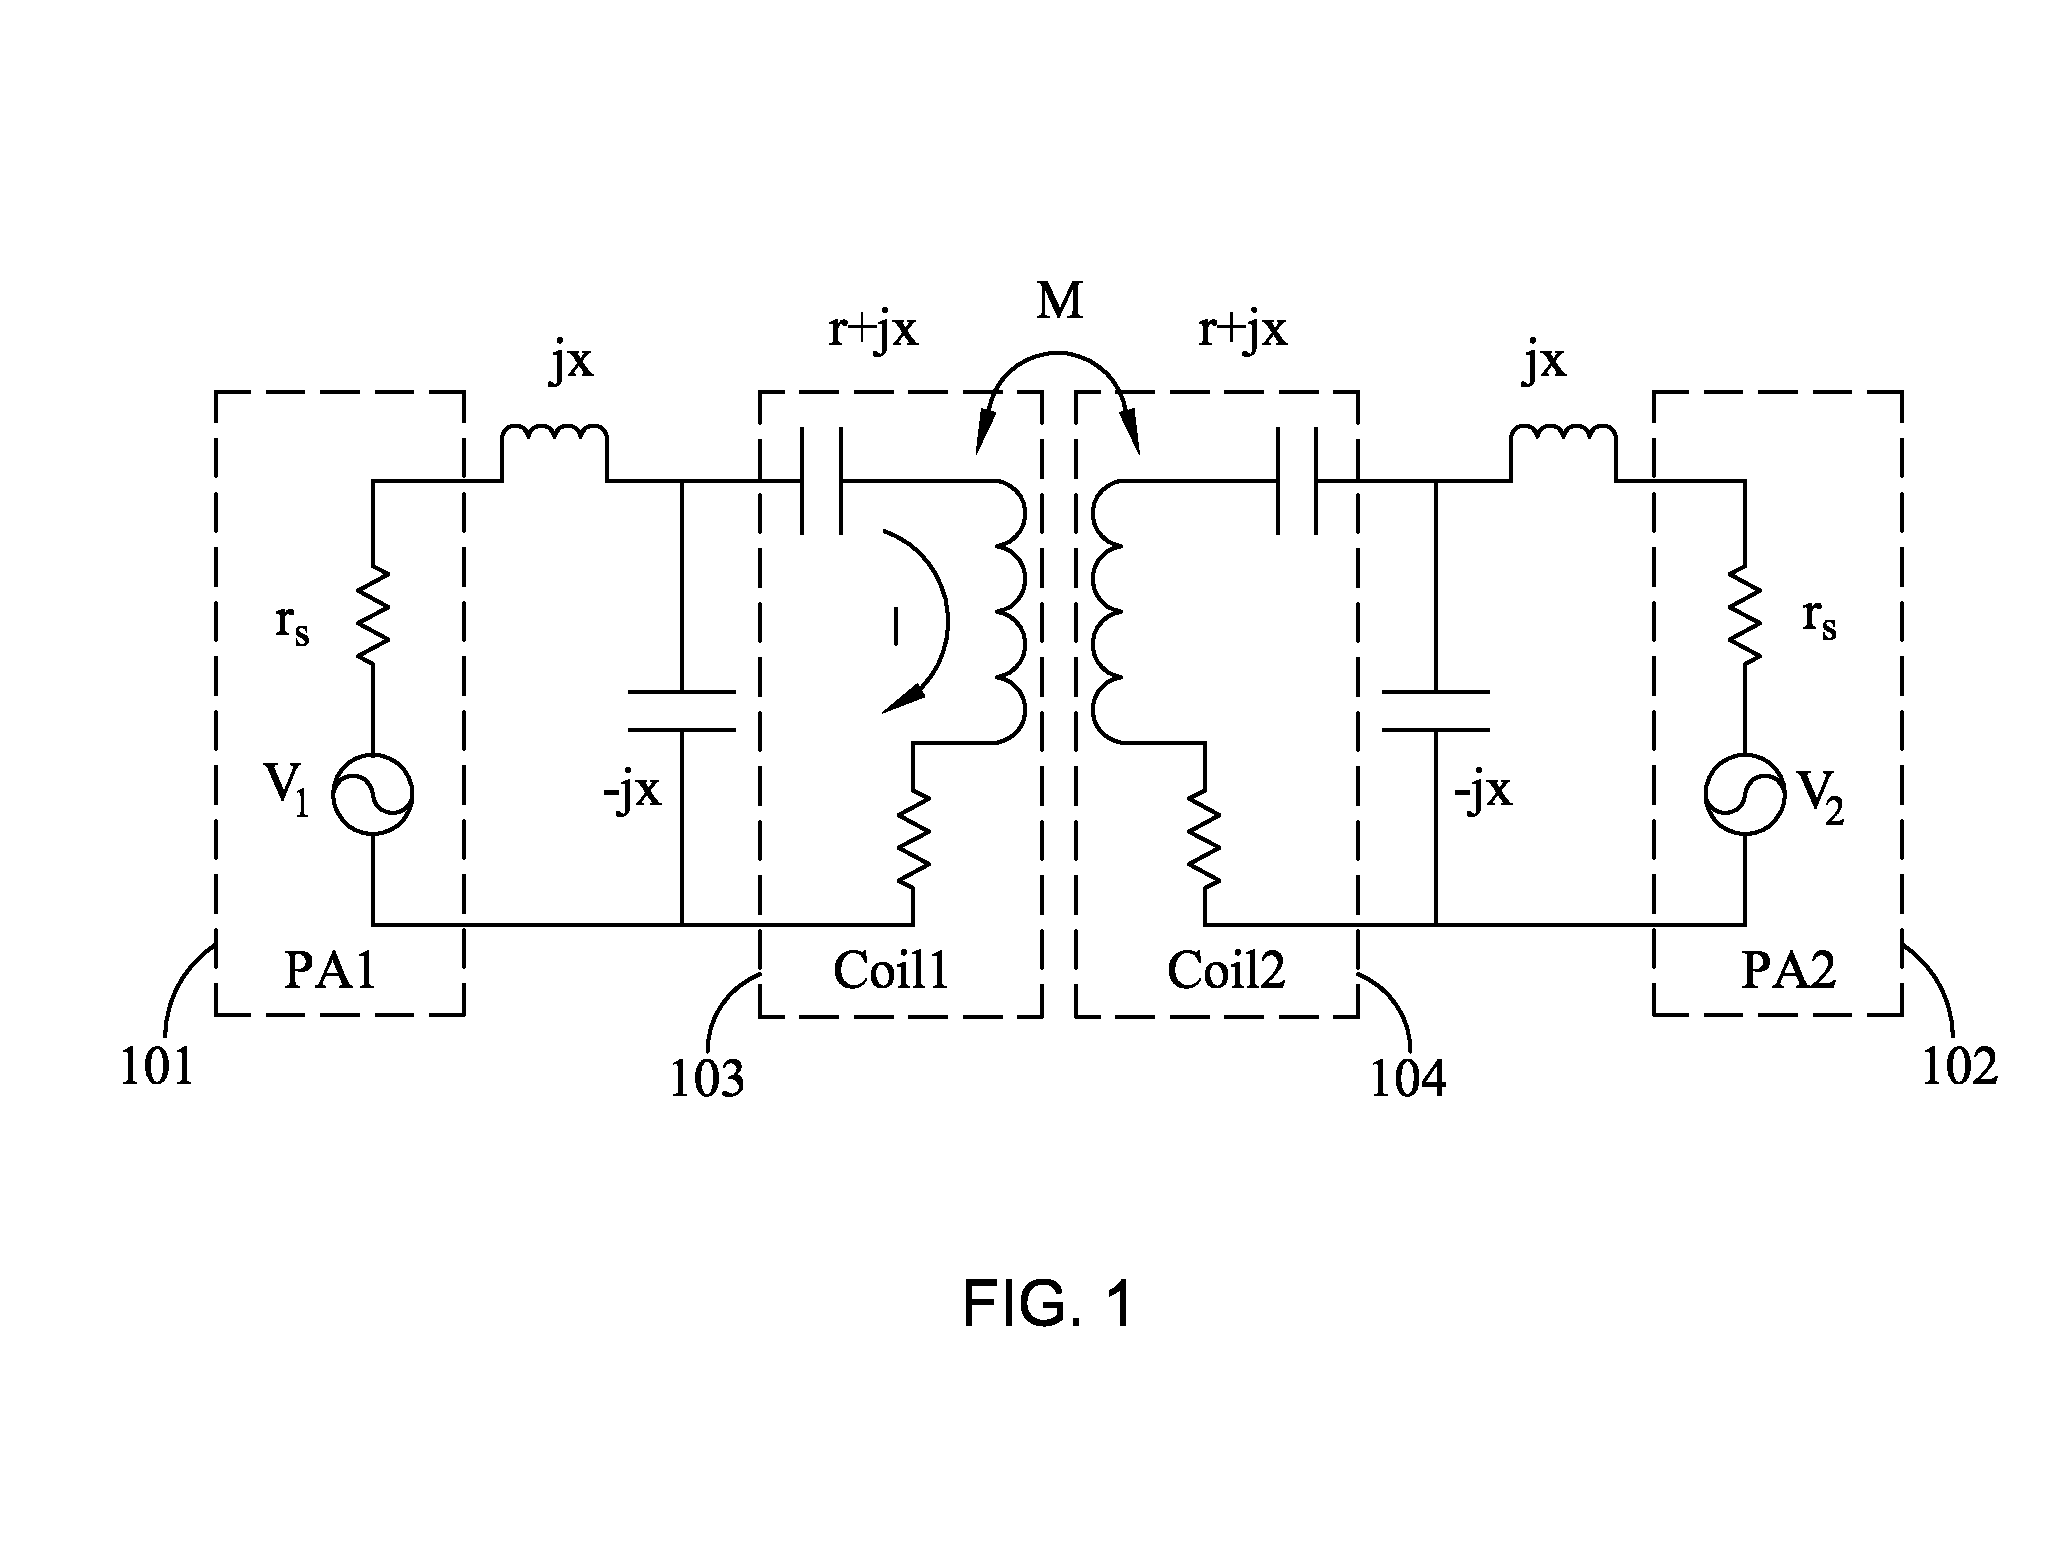 Ultra low output impedance RF power amplifier for parallel excitation